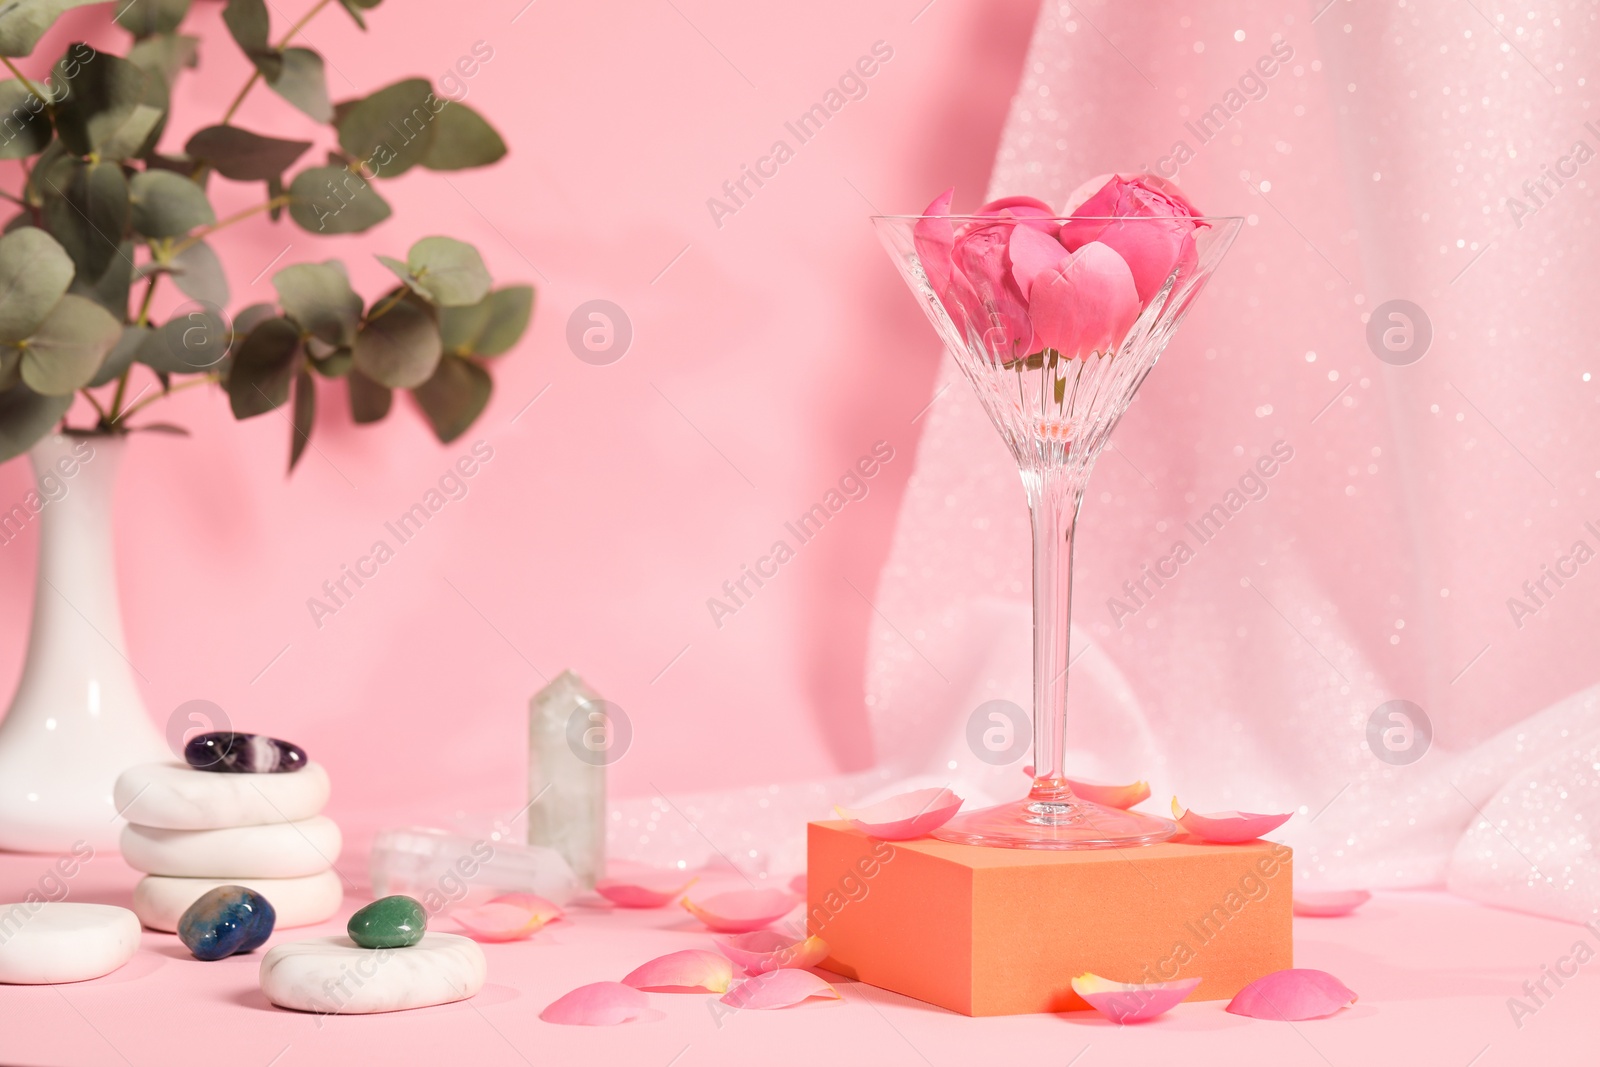 Photo of Martini glass with flowers, stones and petals on pink background